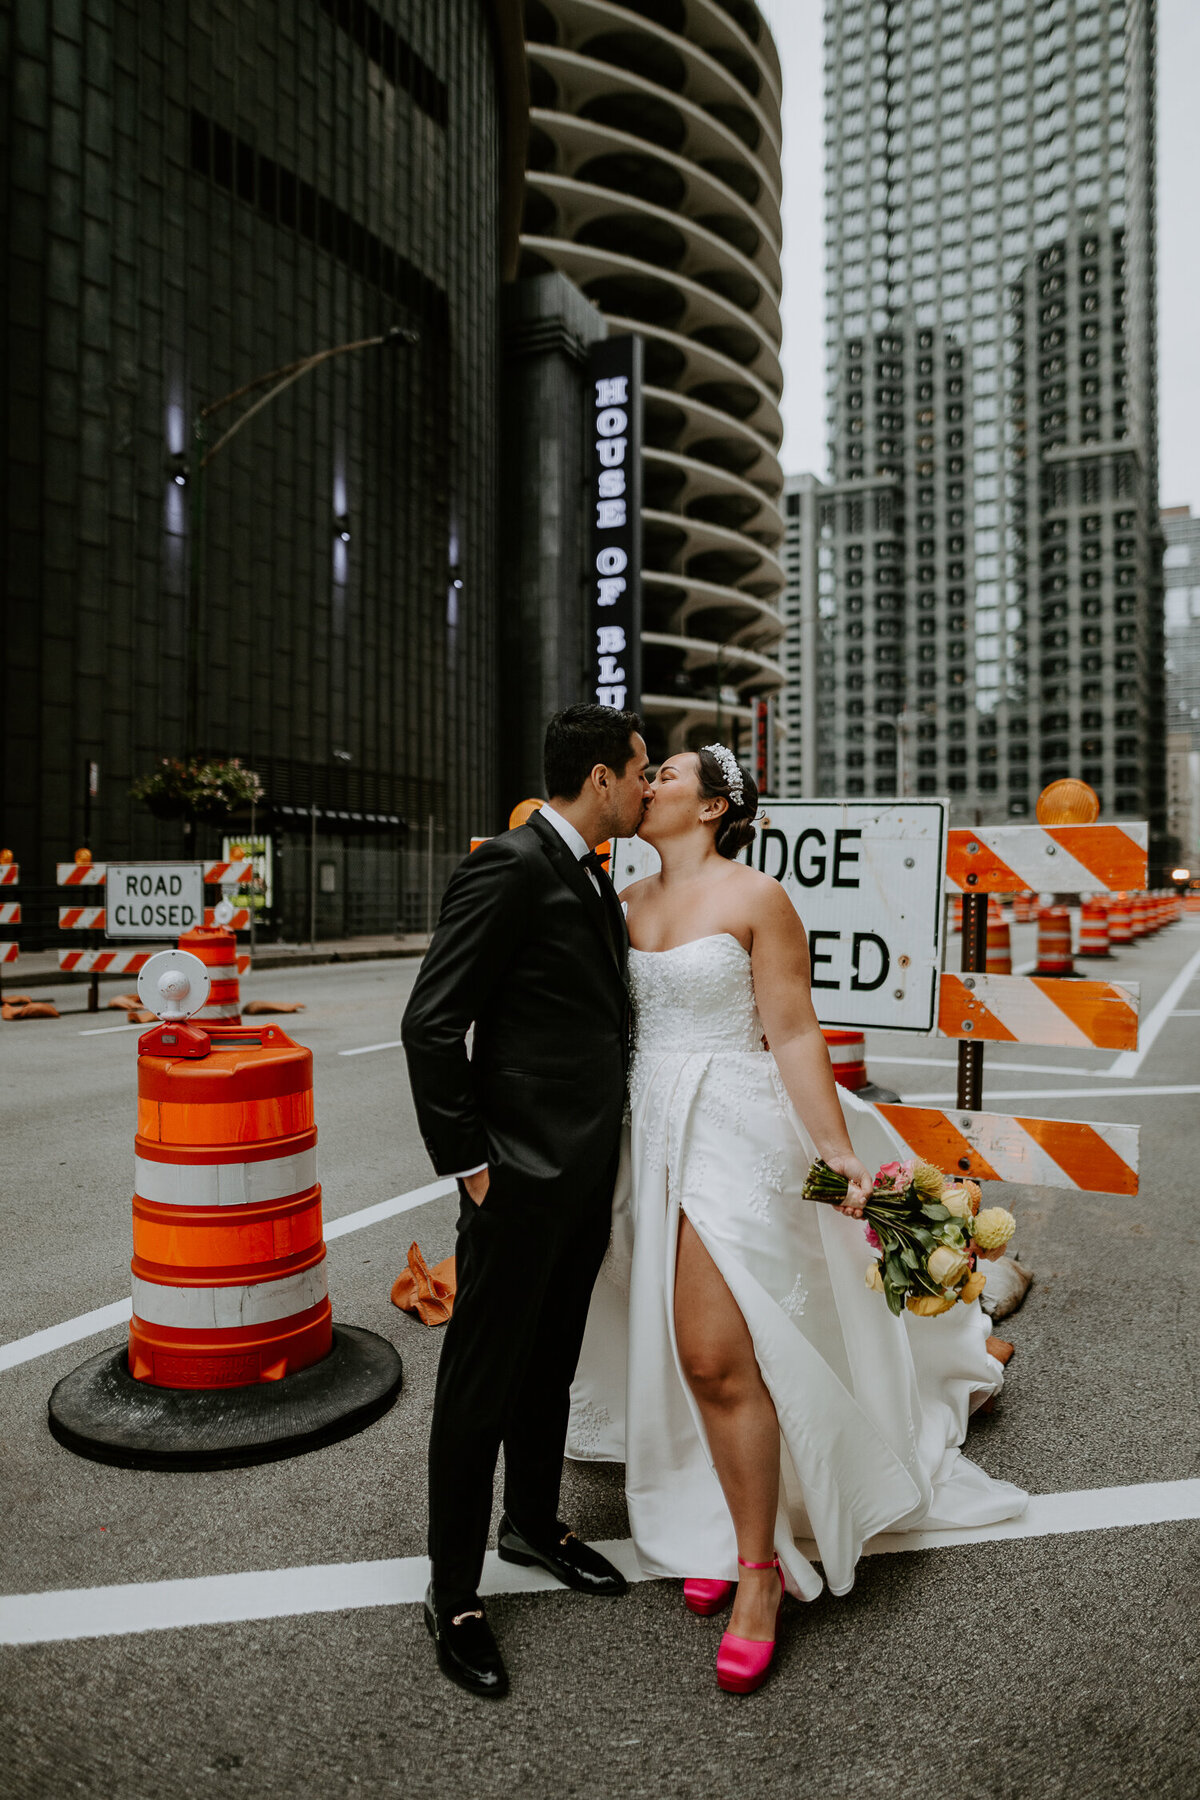 A bride and groom kiss in front of a bridge closed sign in downtown Chicago.